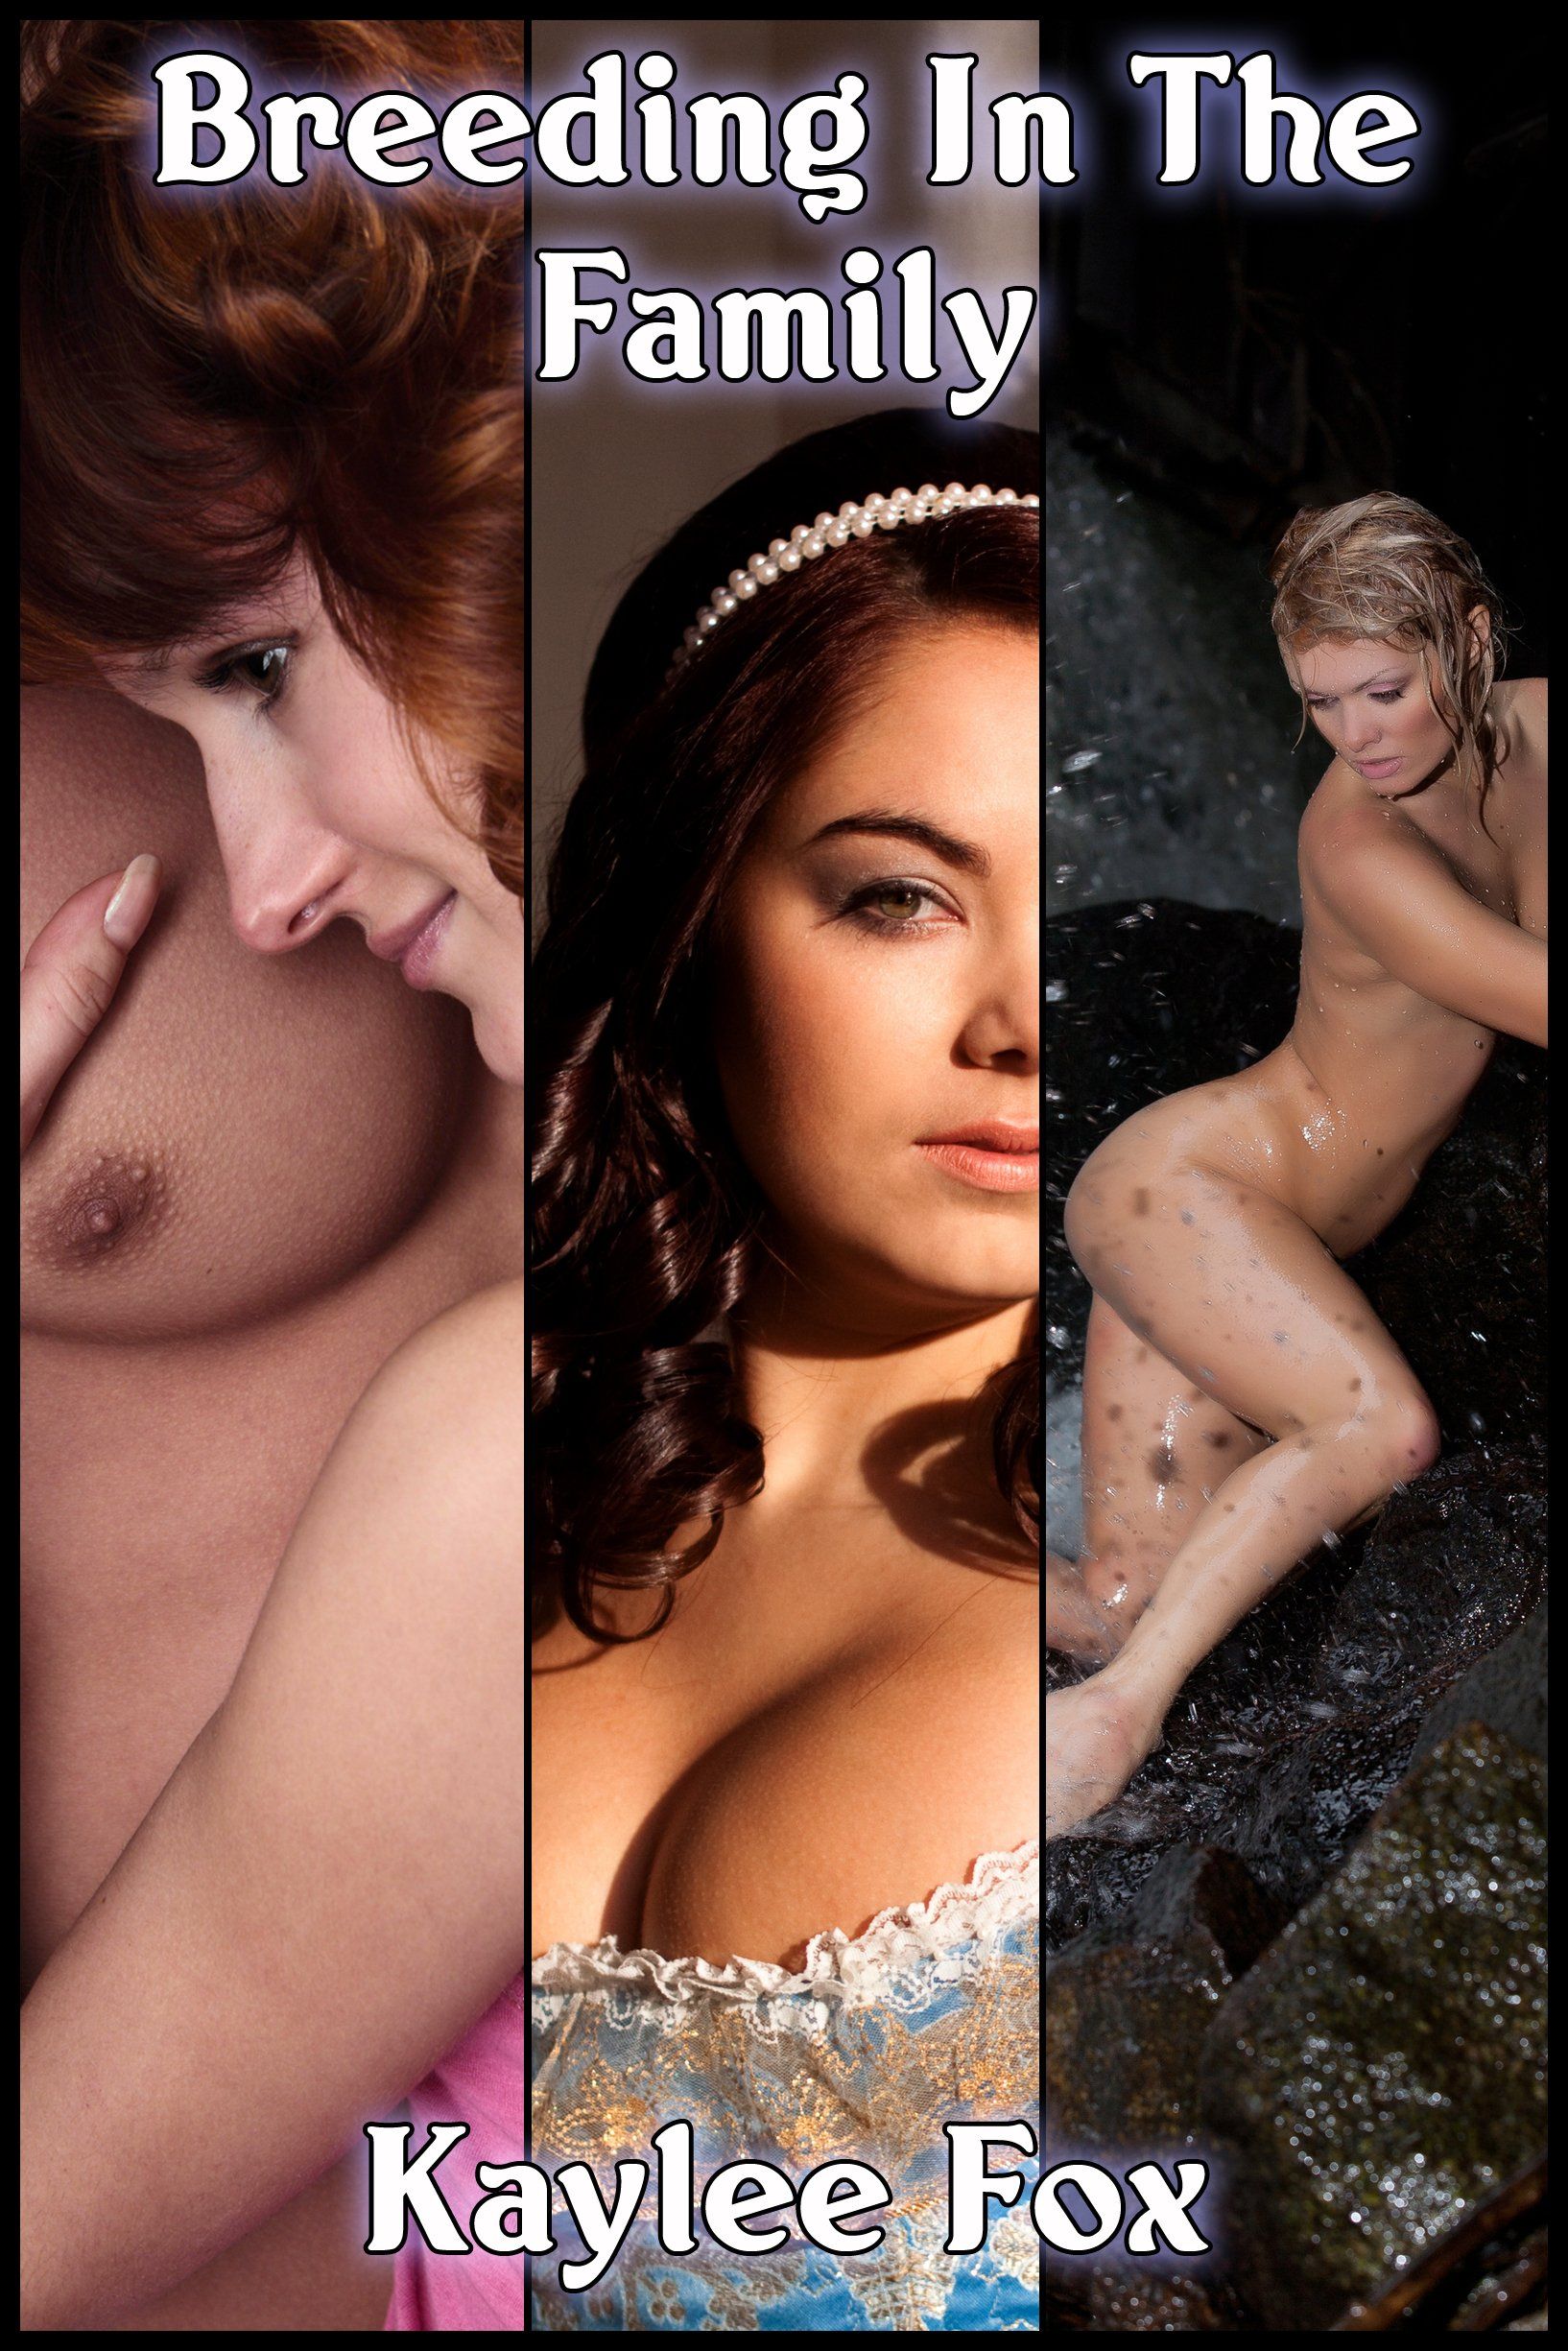 Anamated nude young girls